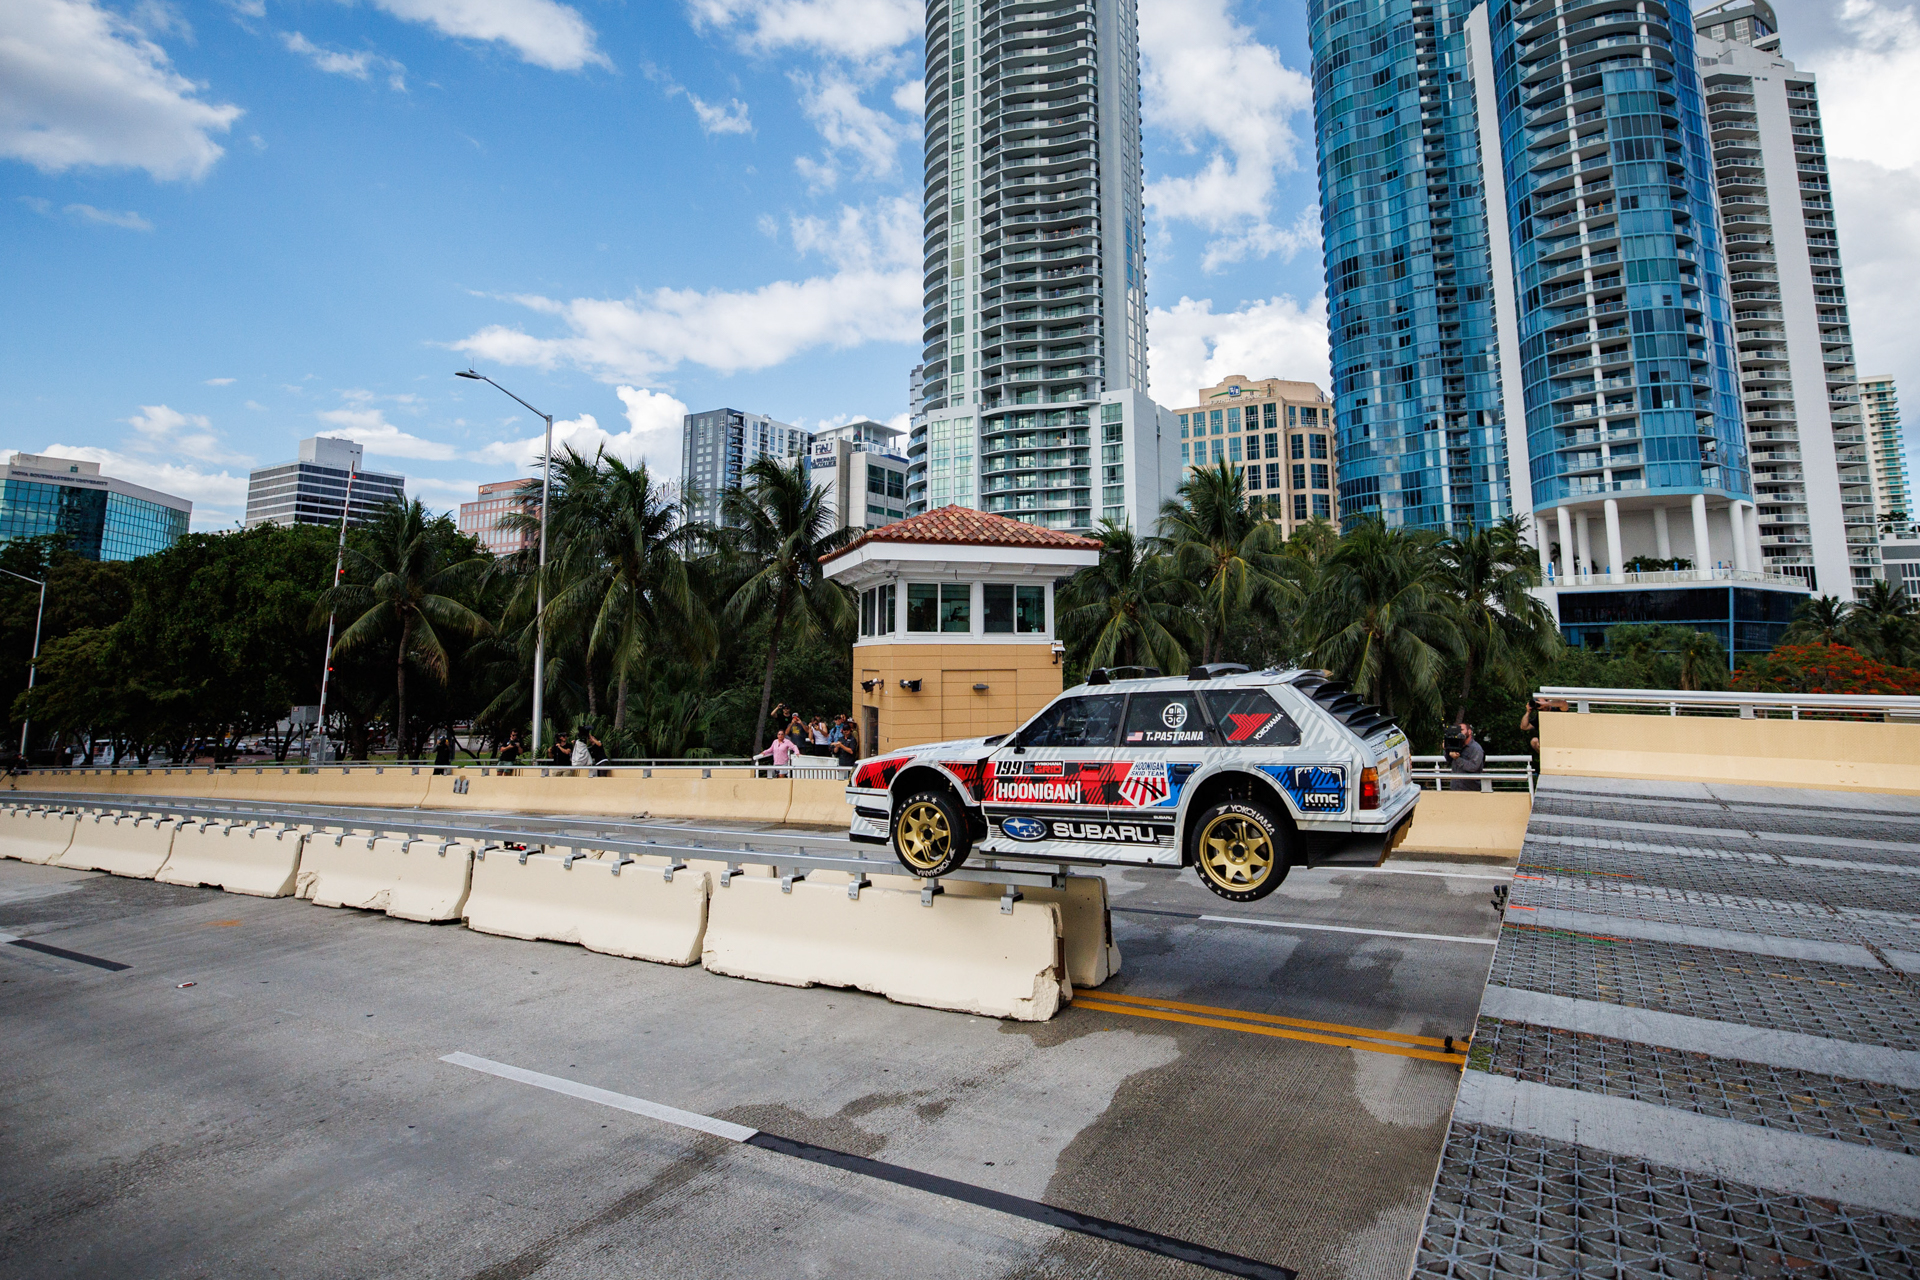 Gymkhana 12 upped the risk factor because of Travis Pastrana